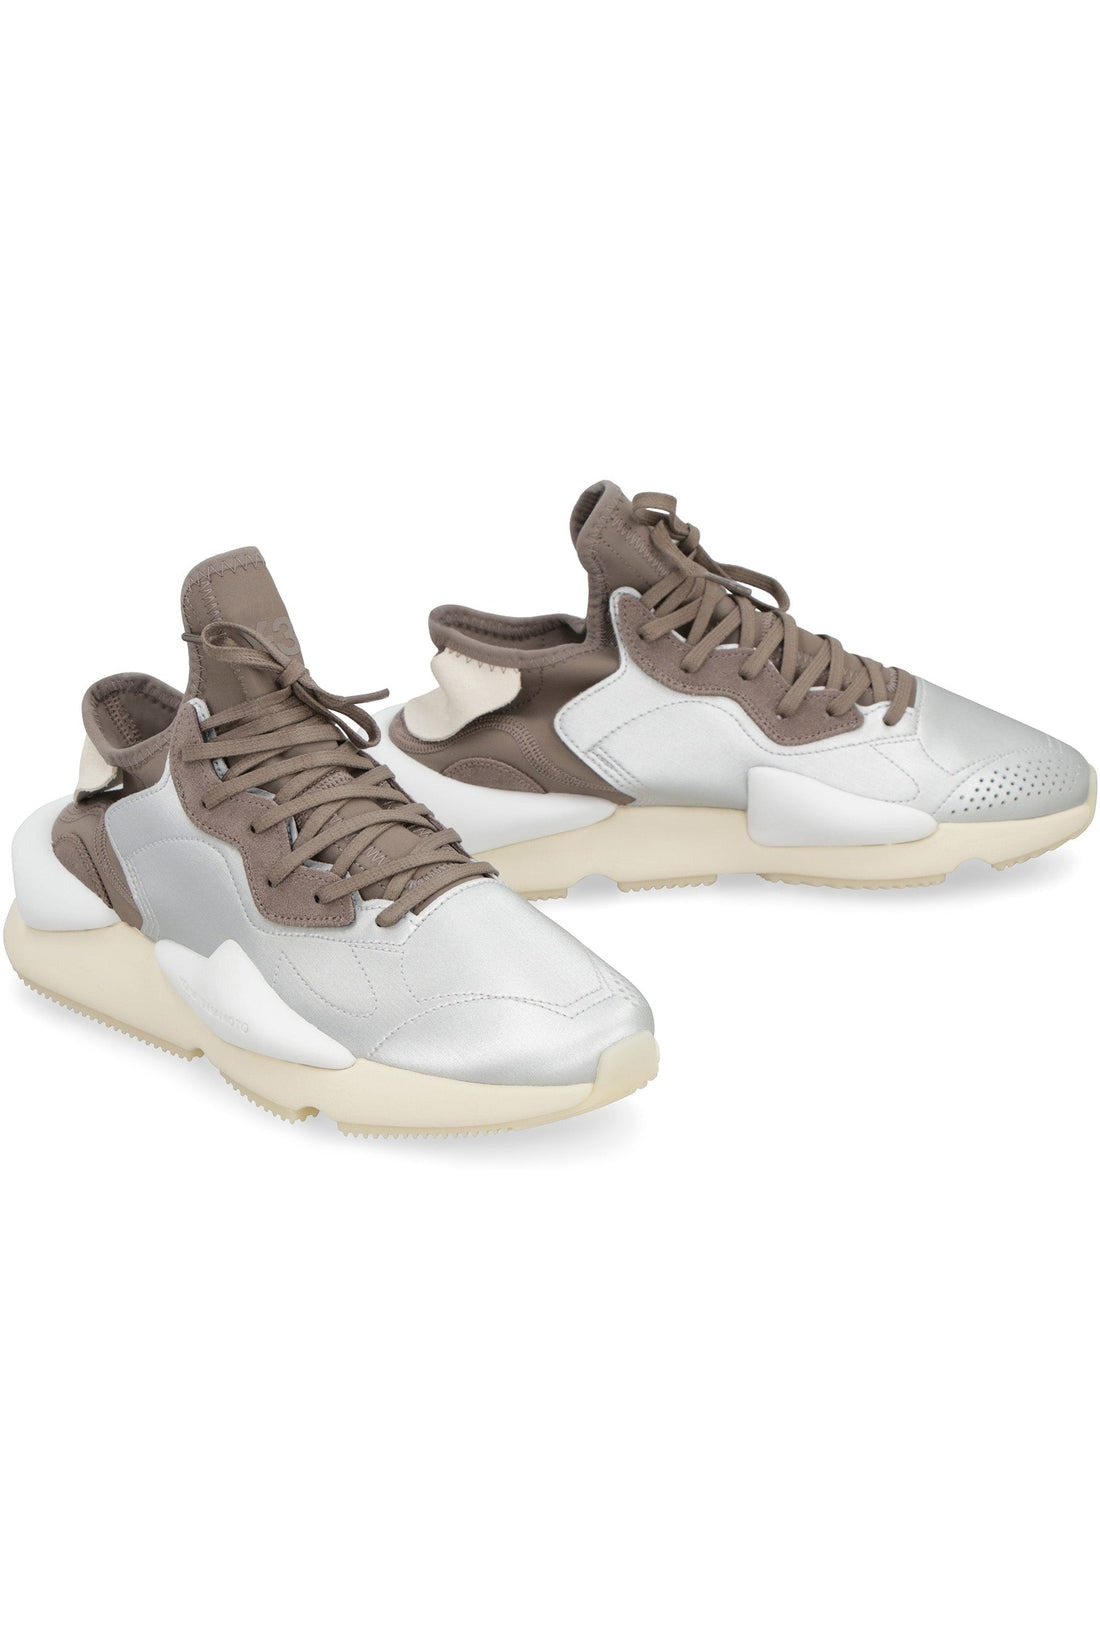 adidas Y-3-OUTLET-SALE-Kaiwa low-top sneakers-ARCHIVIST